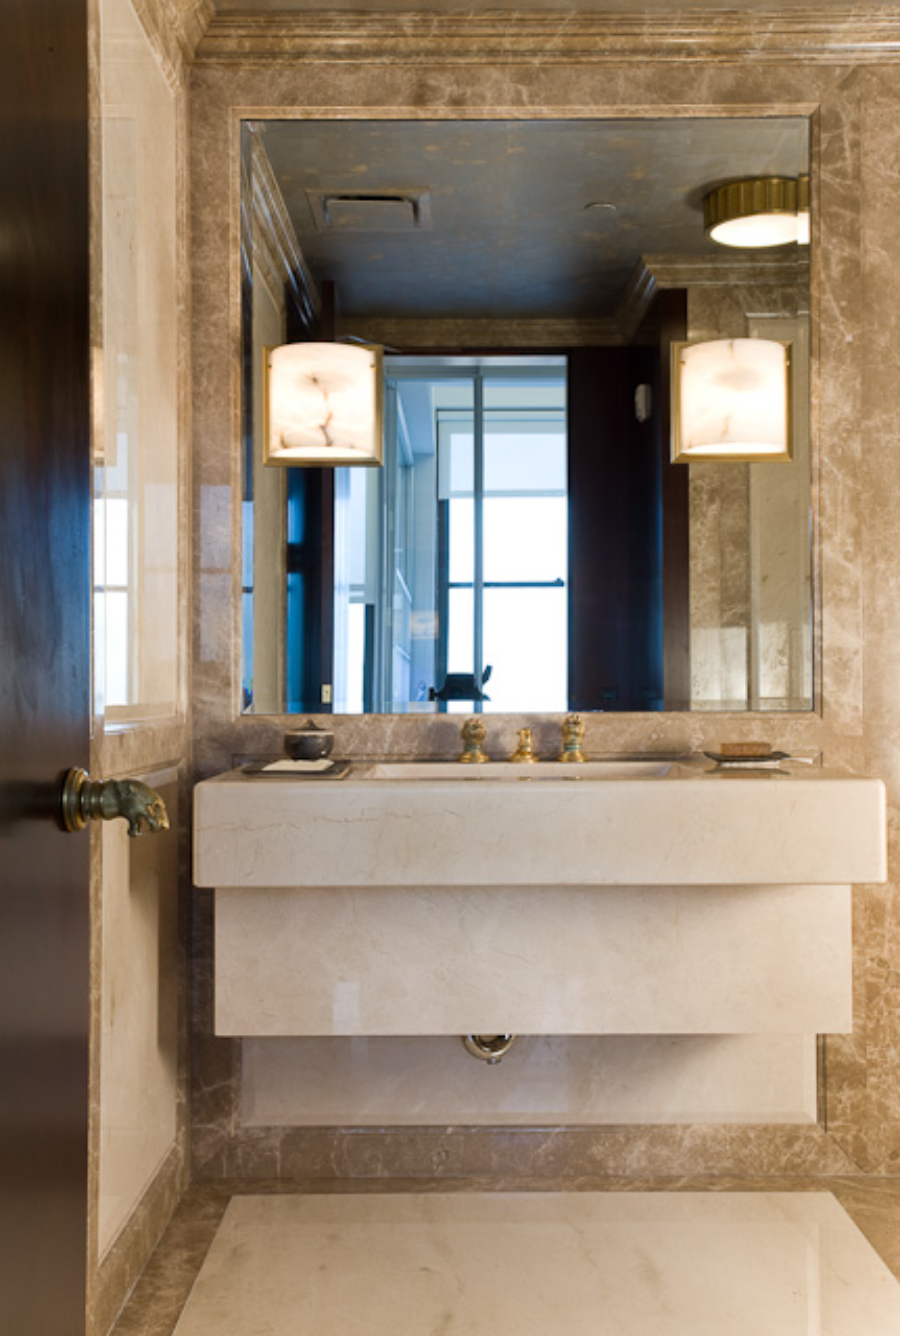 Luxury Bathroom Inspirations by Aman & Meeks_Accretive Offices